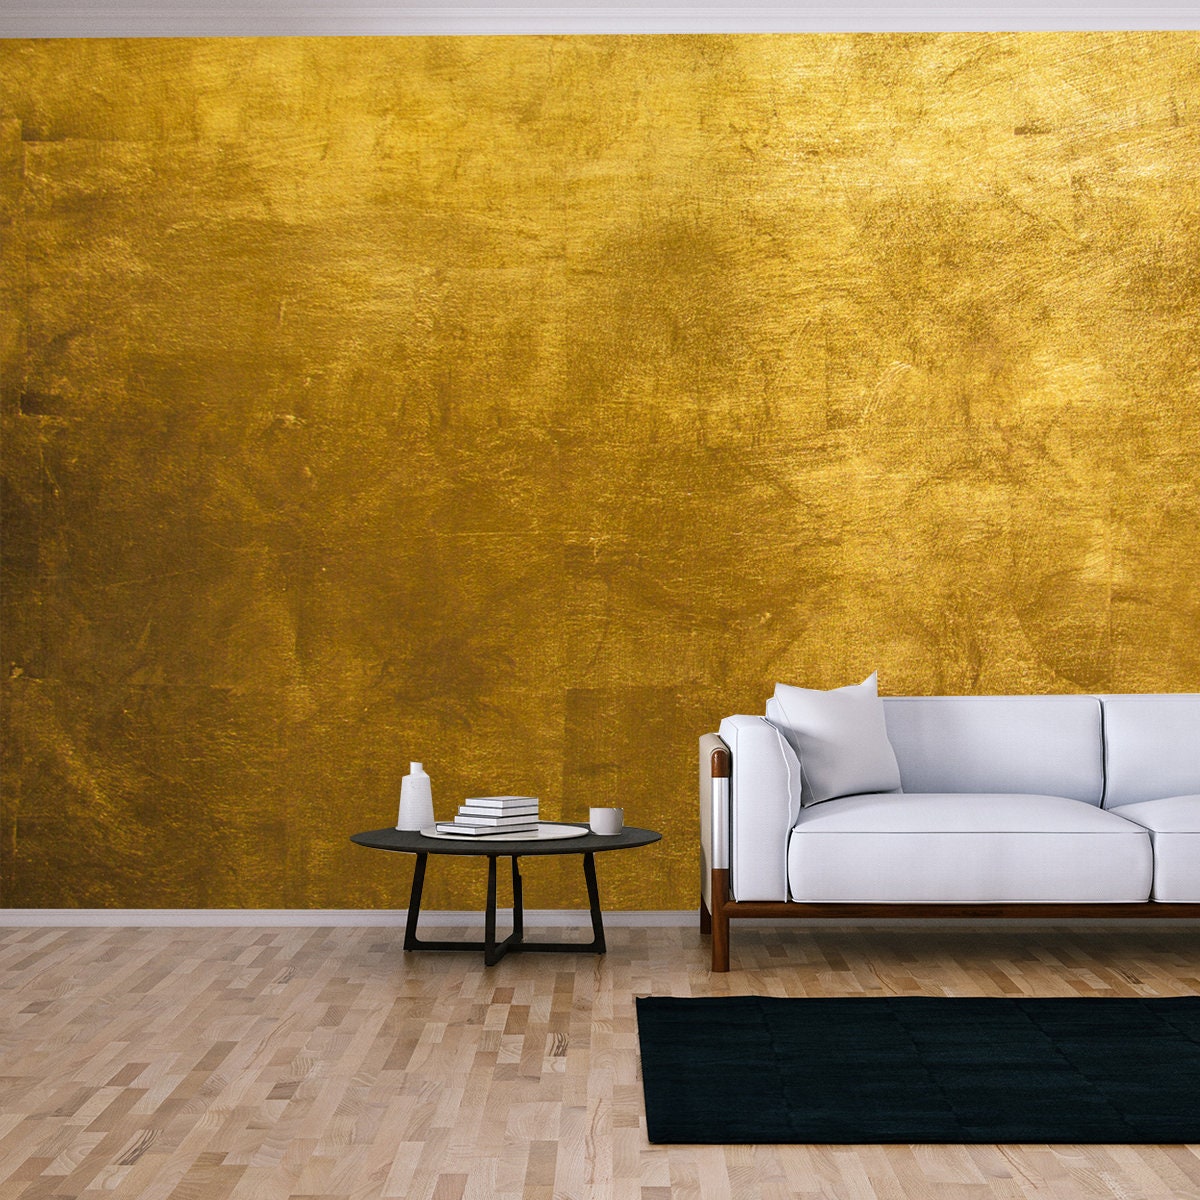 Luxury Shiny Gold Background Texture Wallpaper Living Room Mural